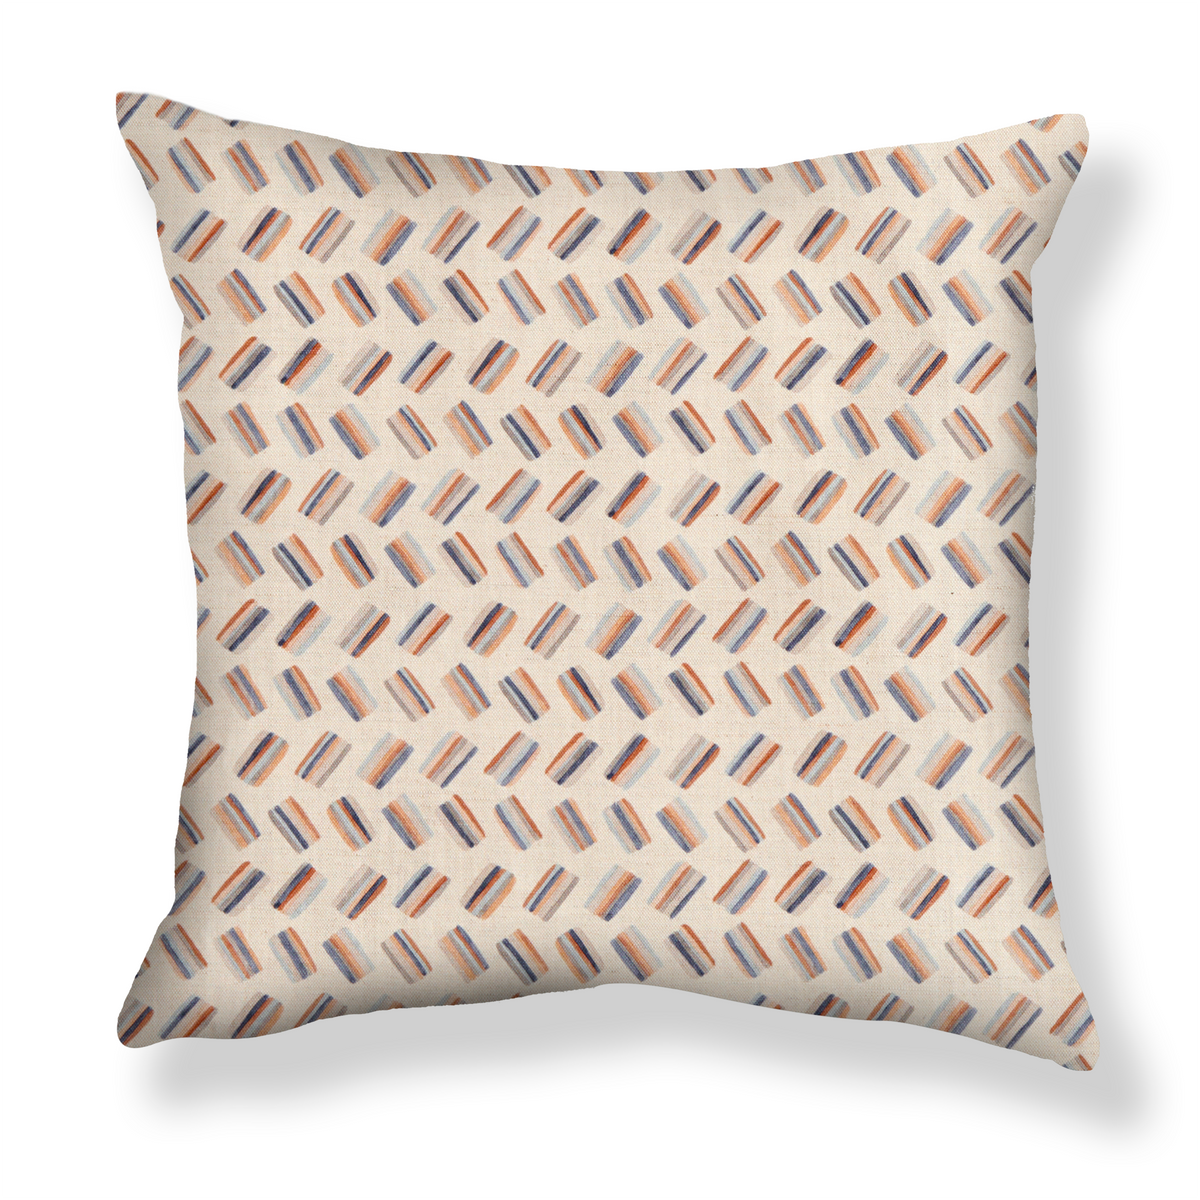 Candy Pillow in Peach/Blue